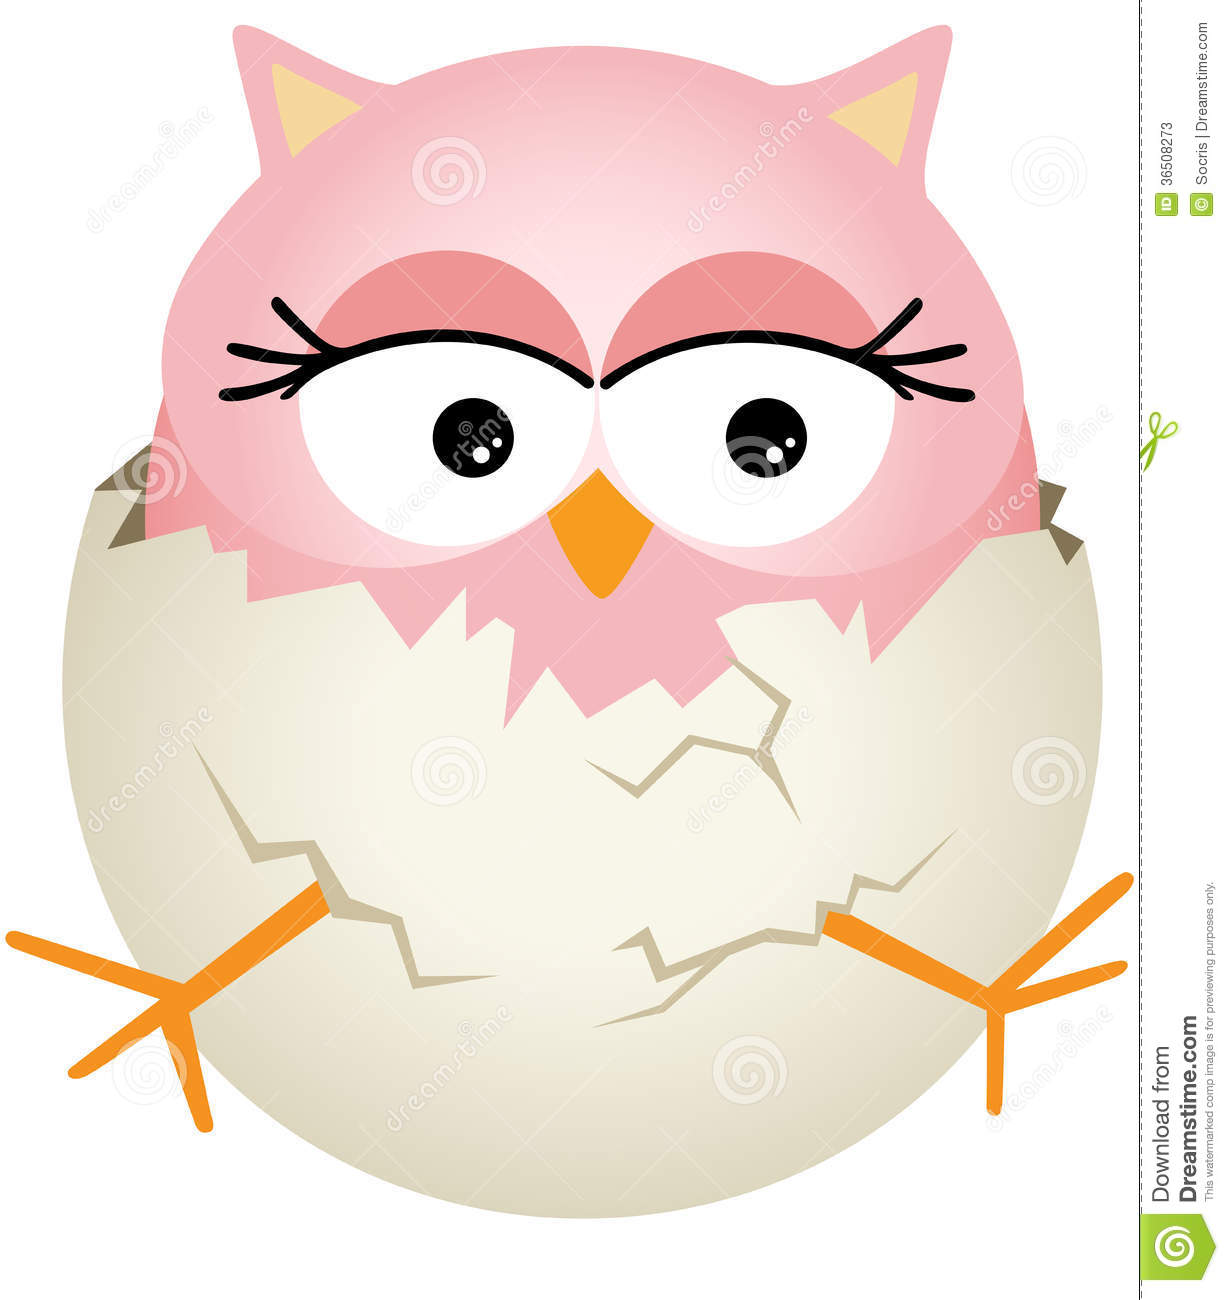 Image Representing A Pink Baby Owl In Egg Isolated On White